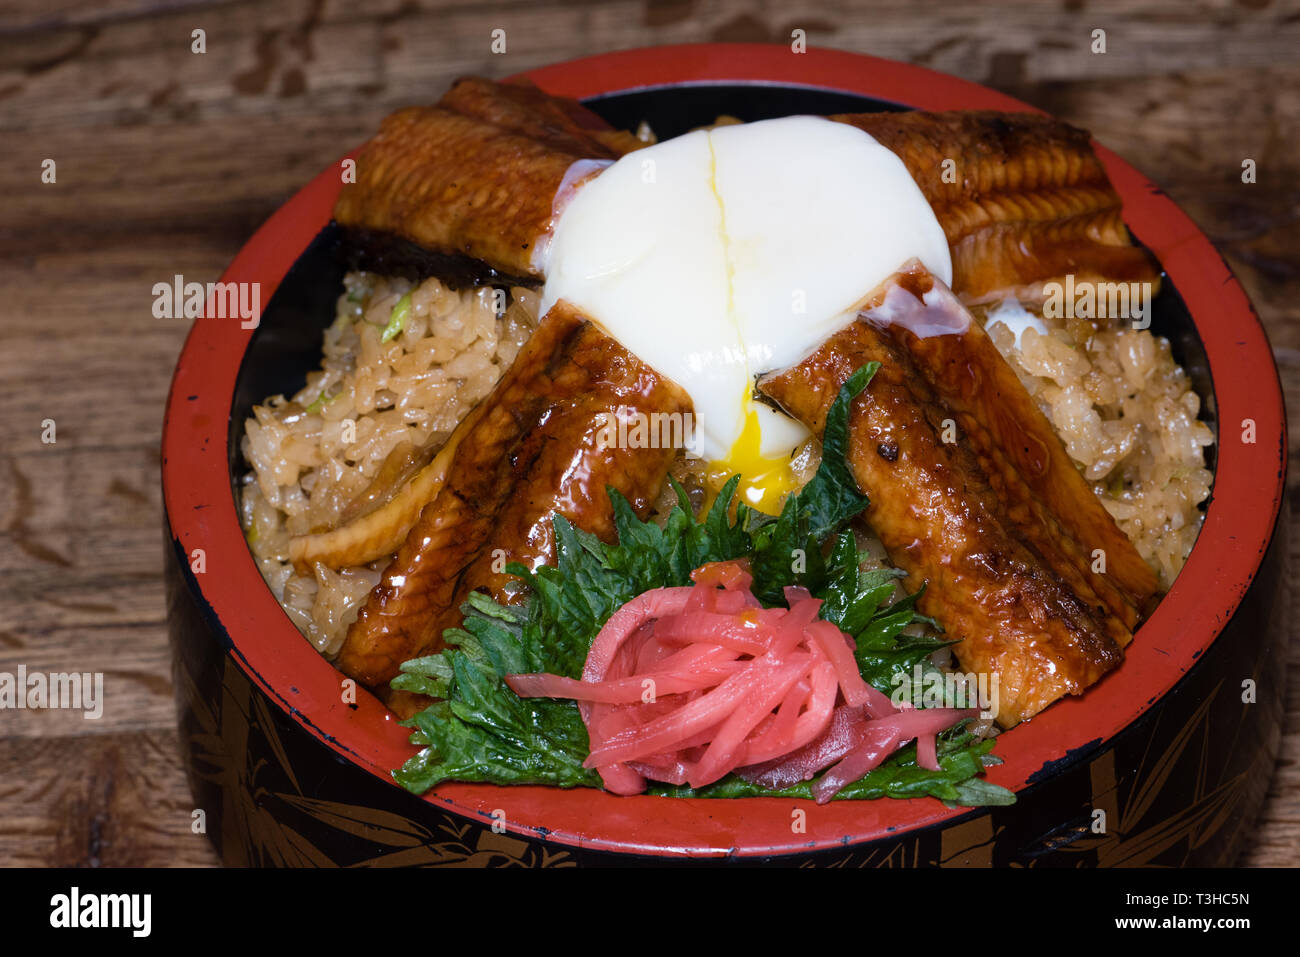 Japanese fusion dish with spicy rice with tamari sauce, roasted eel, egg and red turnip, in a decorated bowl, dark wood table background Stock Photo